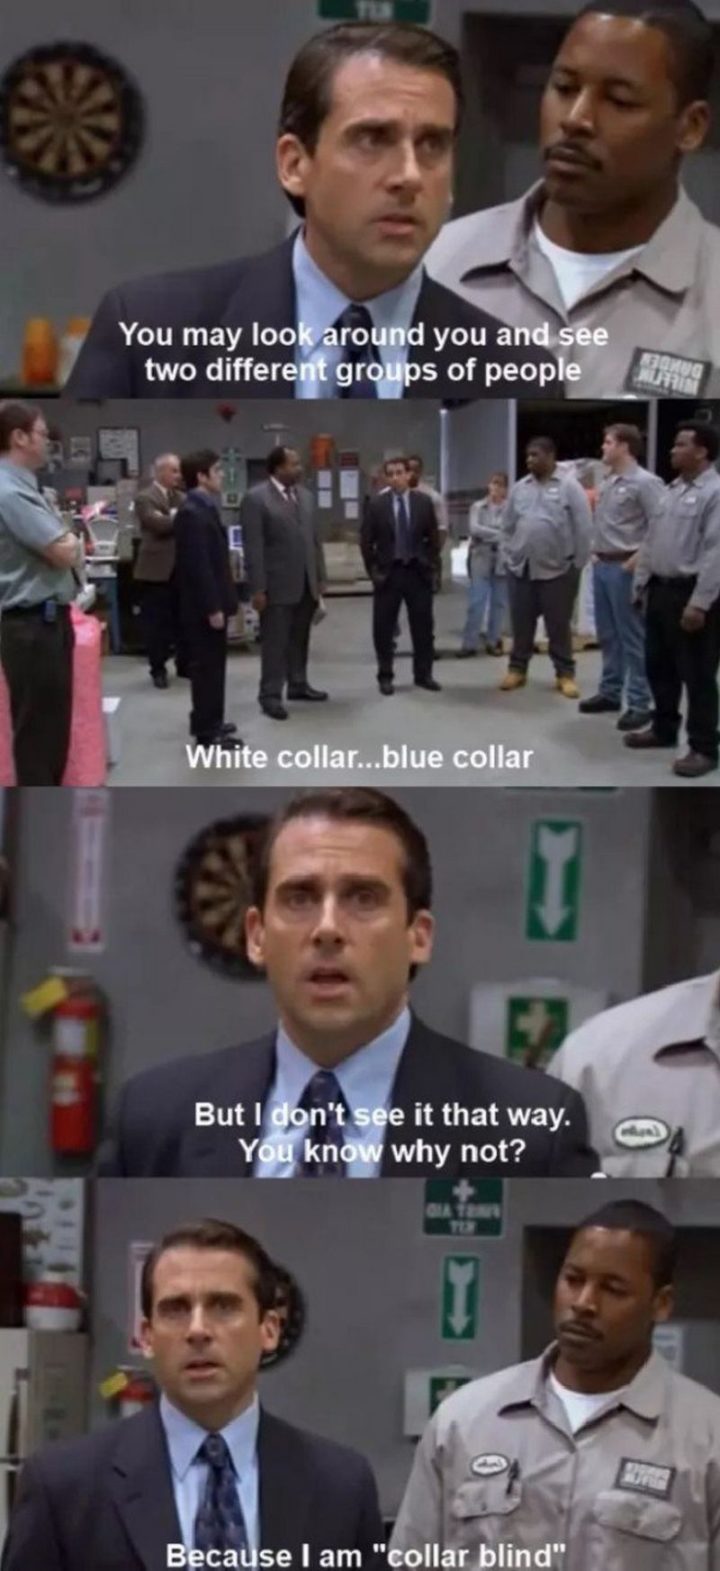 30 Michael Scott quotes - "You may look around you and see two different groups of people. White collar. Blue collar. But I don't see it that way. You know why not? Because I am 'collar blind'."